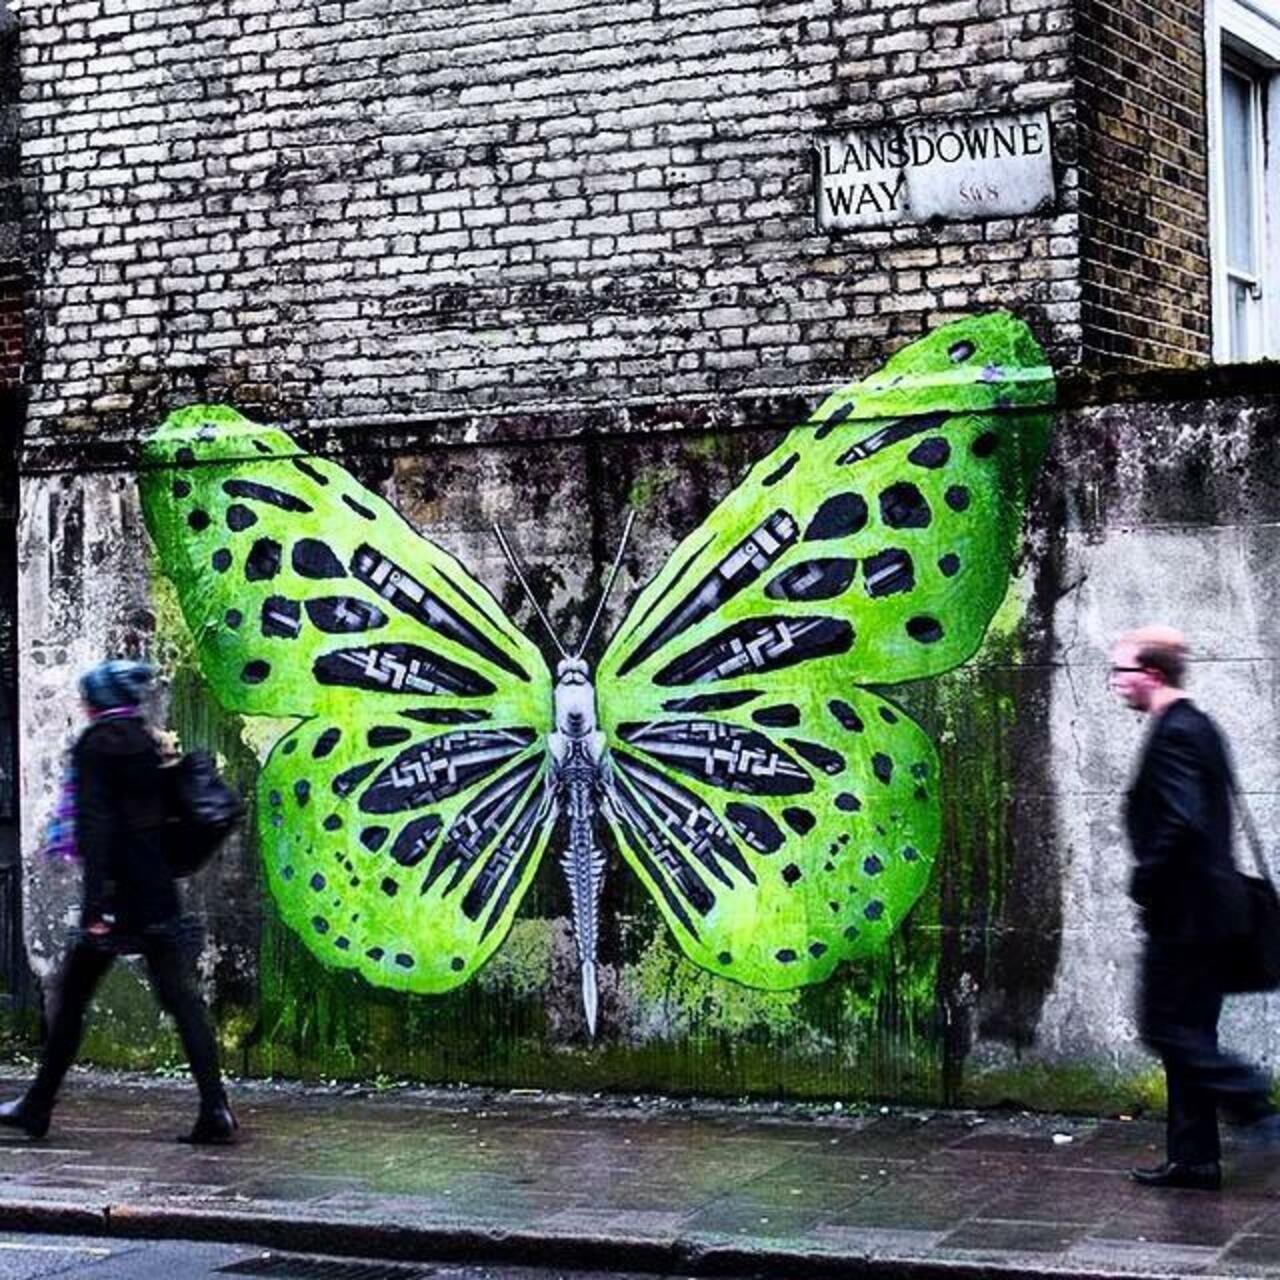 Technology & nature merge in this new Street Art piece by the artist LUDO

#art #mural #graffiti #streetart http://t.co/uElBiNYc8O